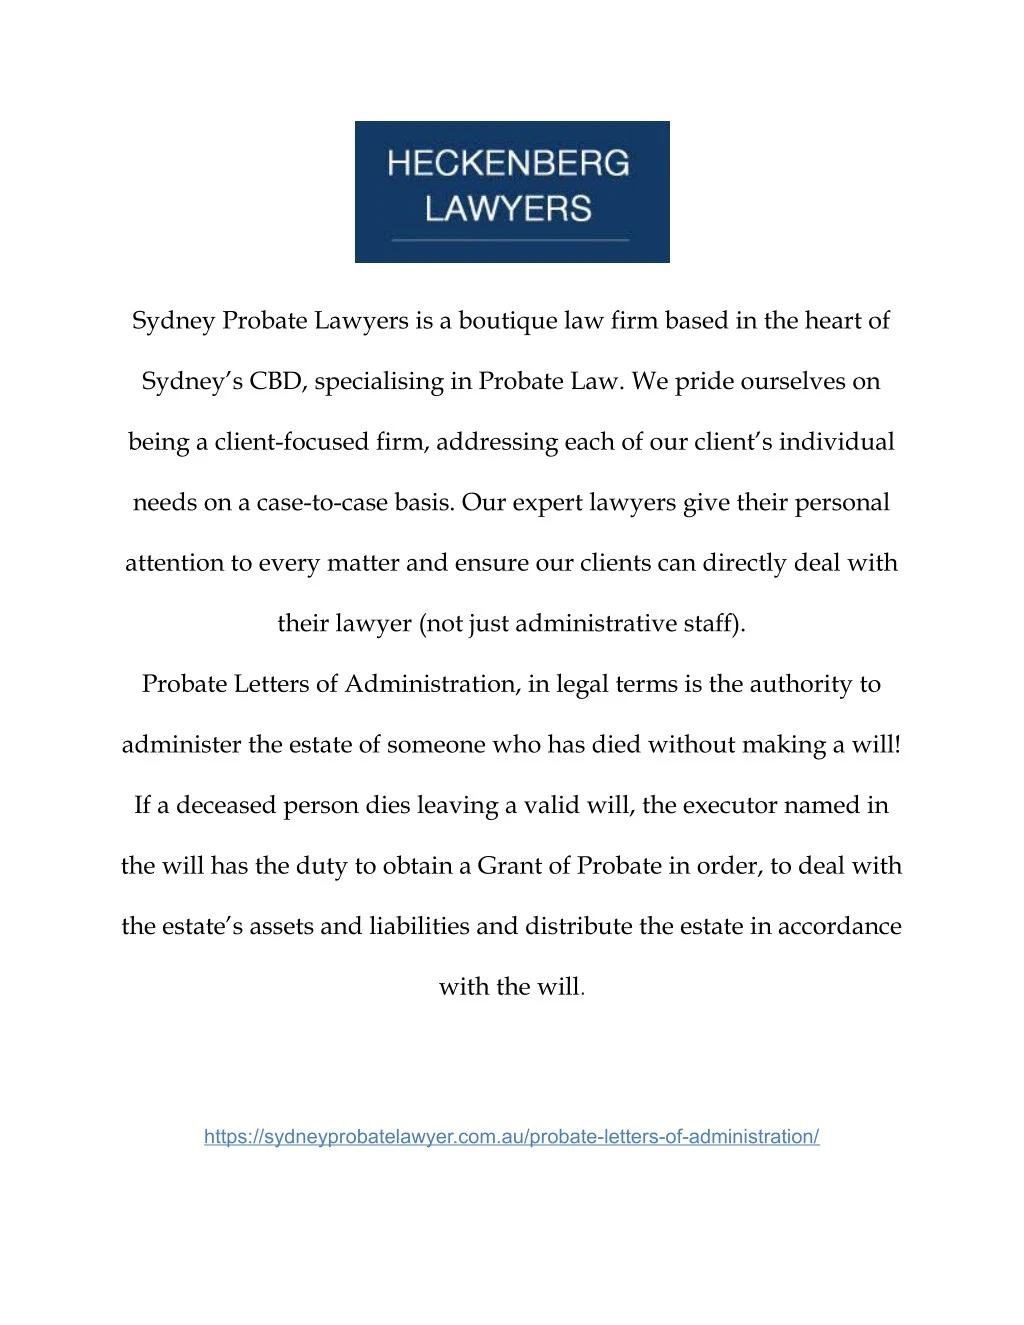 sydney probate lawyers is a boutique law firm